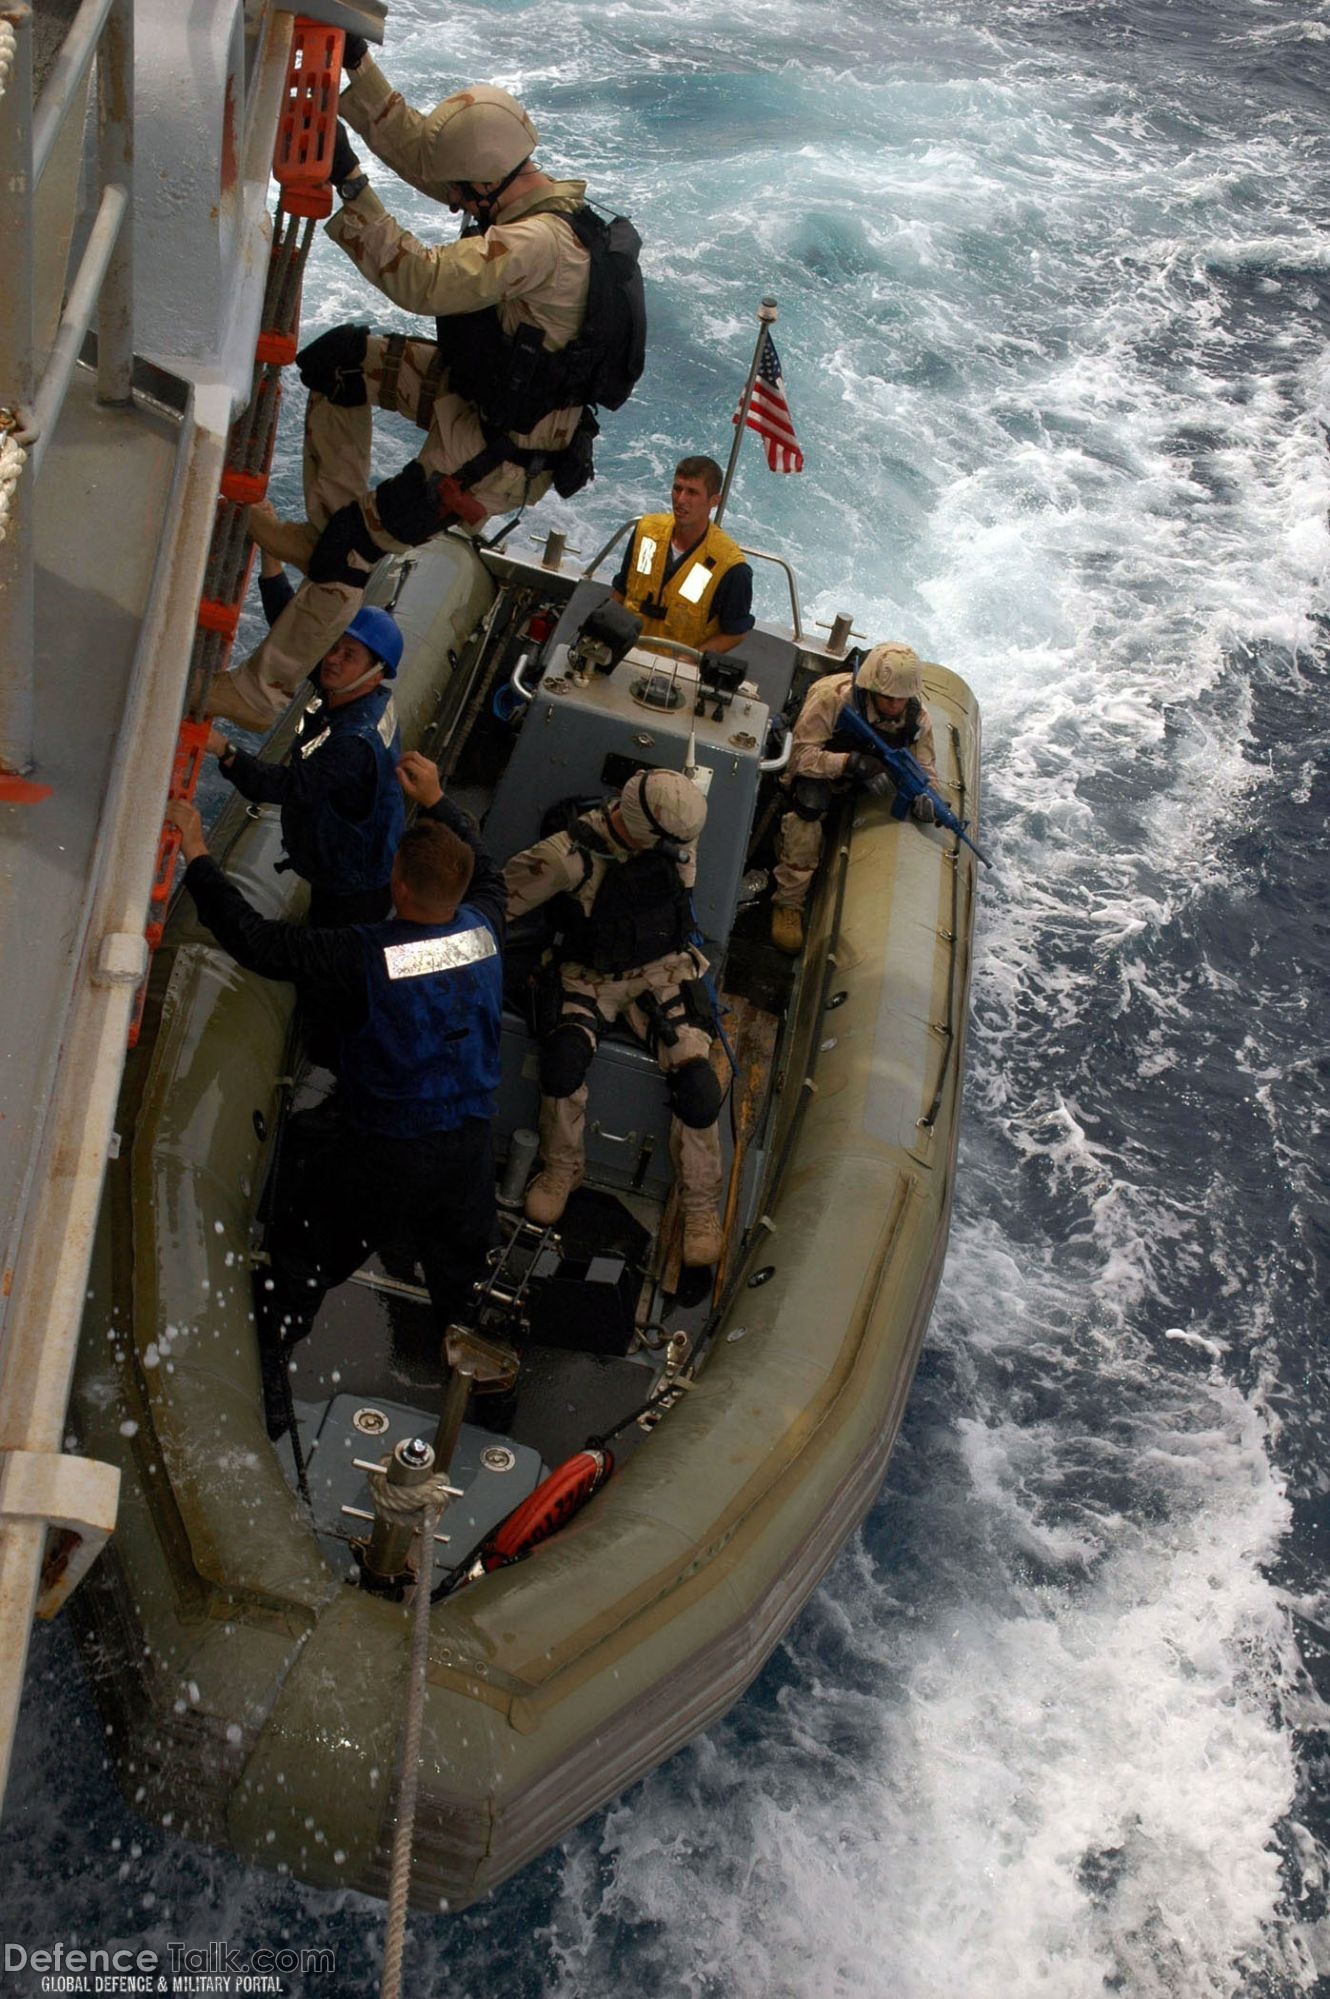 search and seizure team - Malabar 07, Naval Exercise